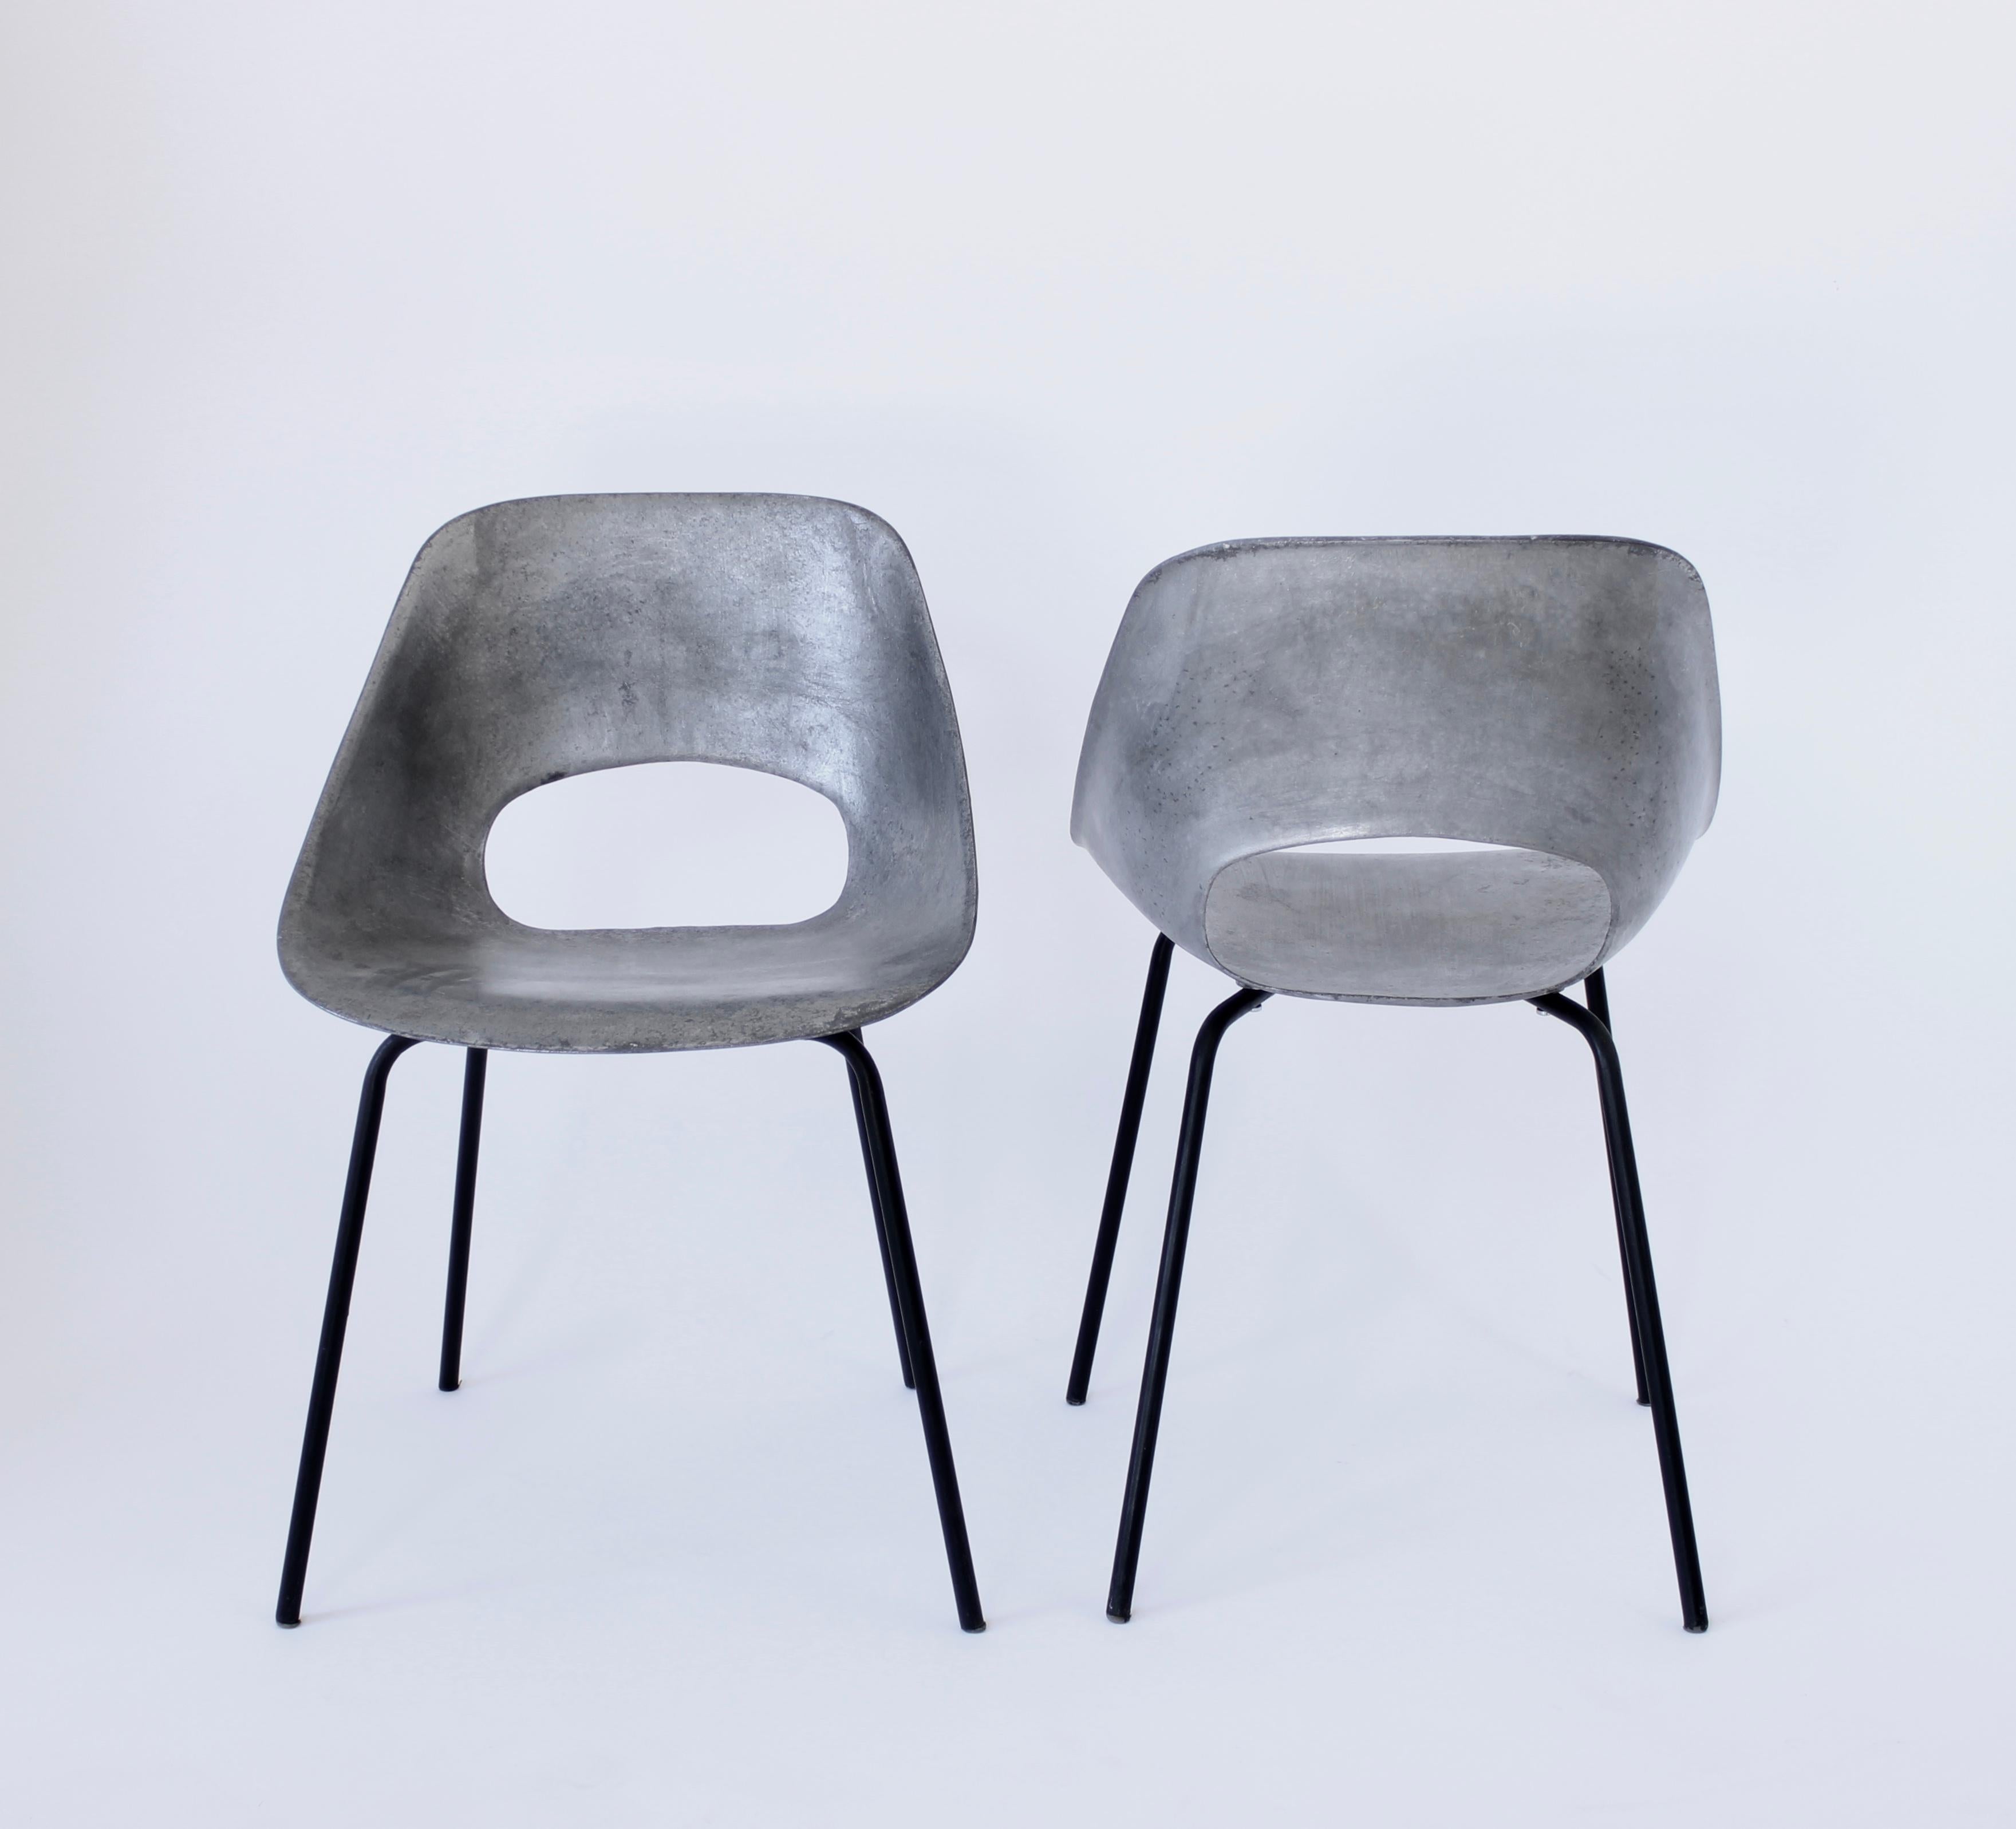 Pair of cast aluminum Tulip chairs by Pierre Guariche for Steiner, France, 1954.
Sculpted and curved cast aluminum seat with an opening on the seat on sleek four leg black tubular metal base. Statement chair and collectable. Comfortable and also a